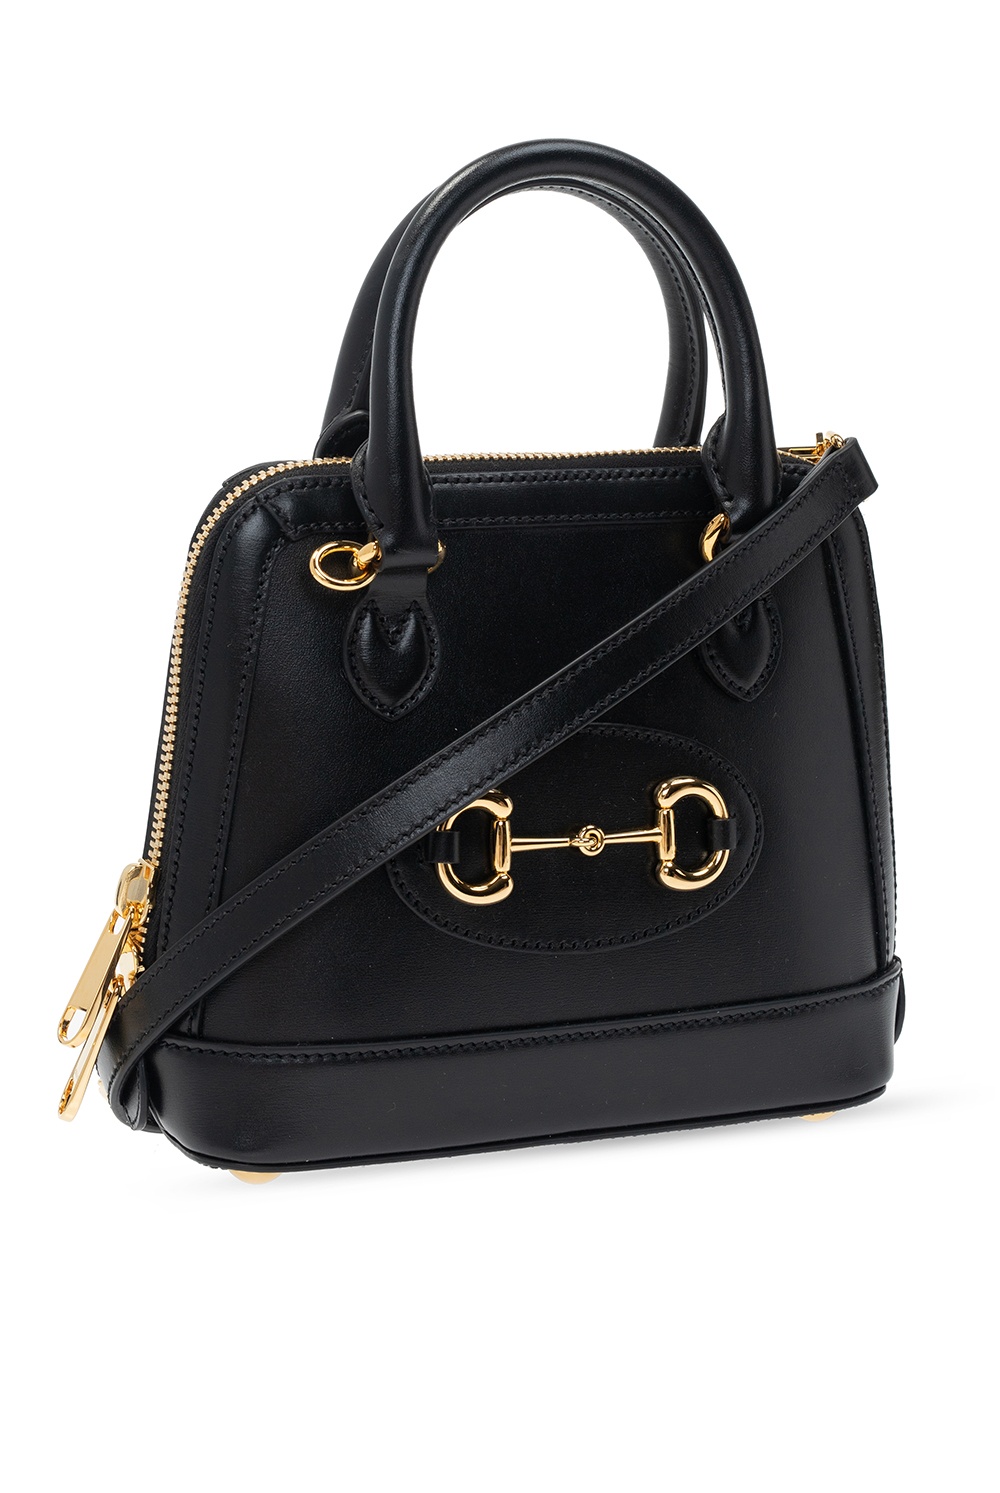 Gucci Gold Guccissima Abbey D-Ring Shoulder Bag Golden Leather